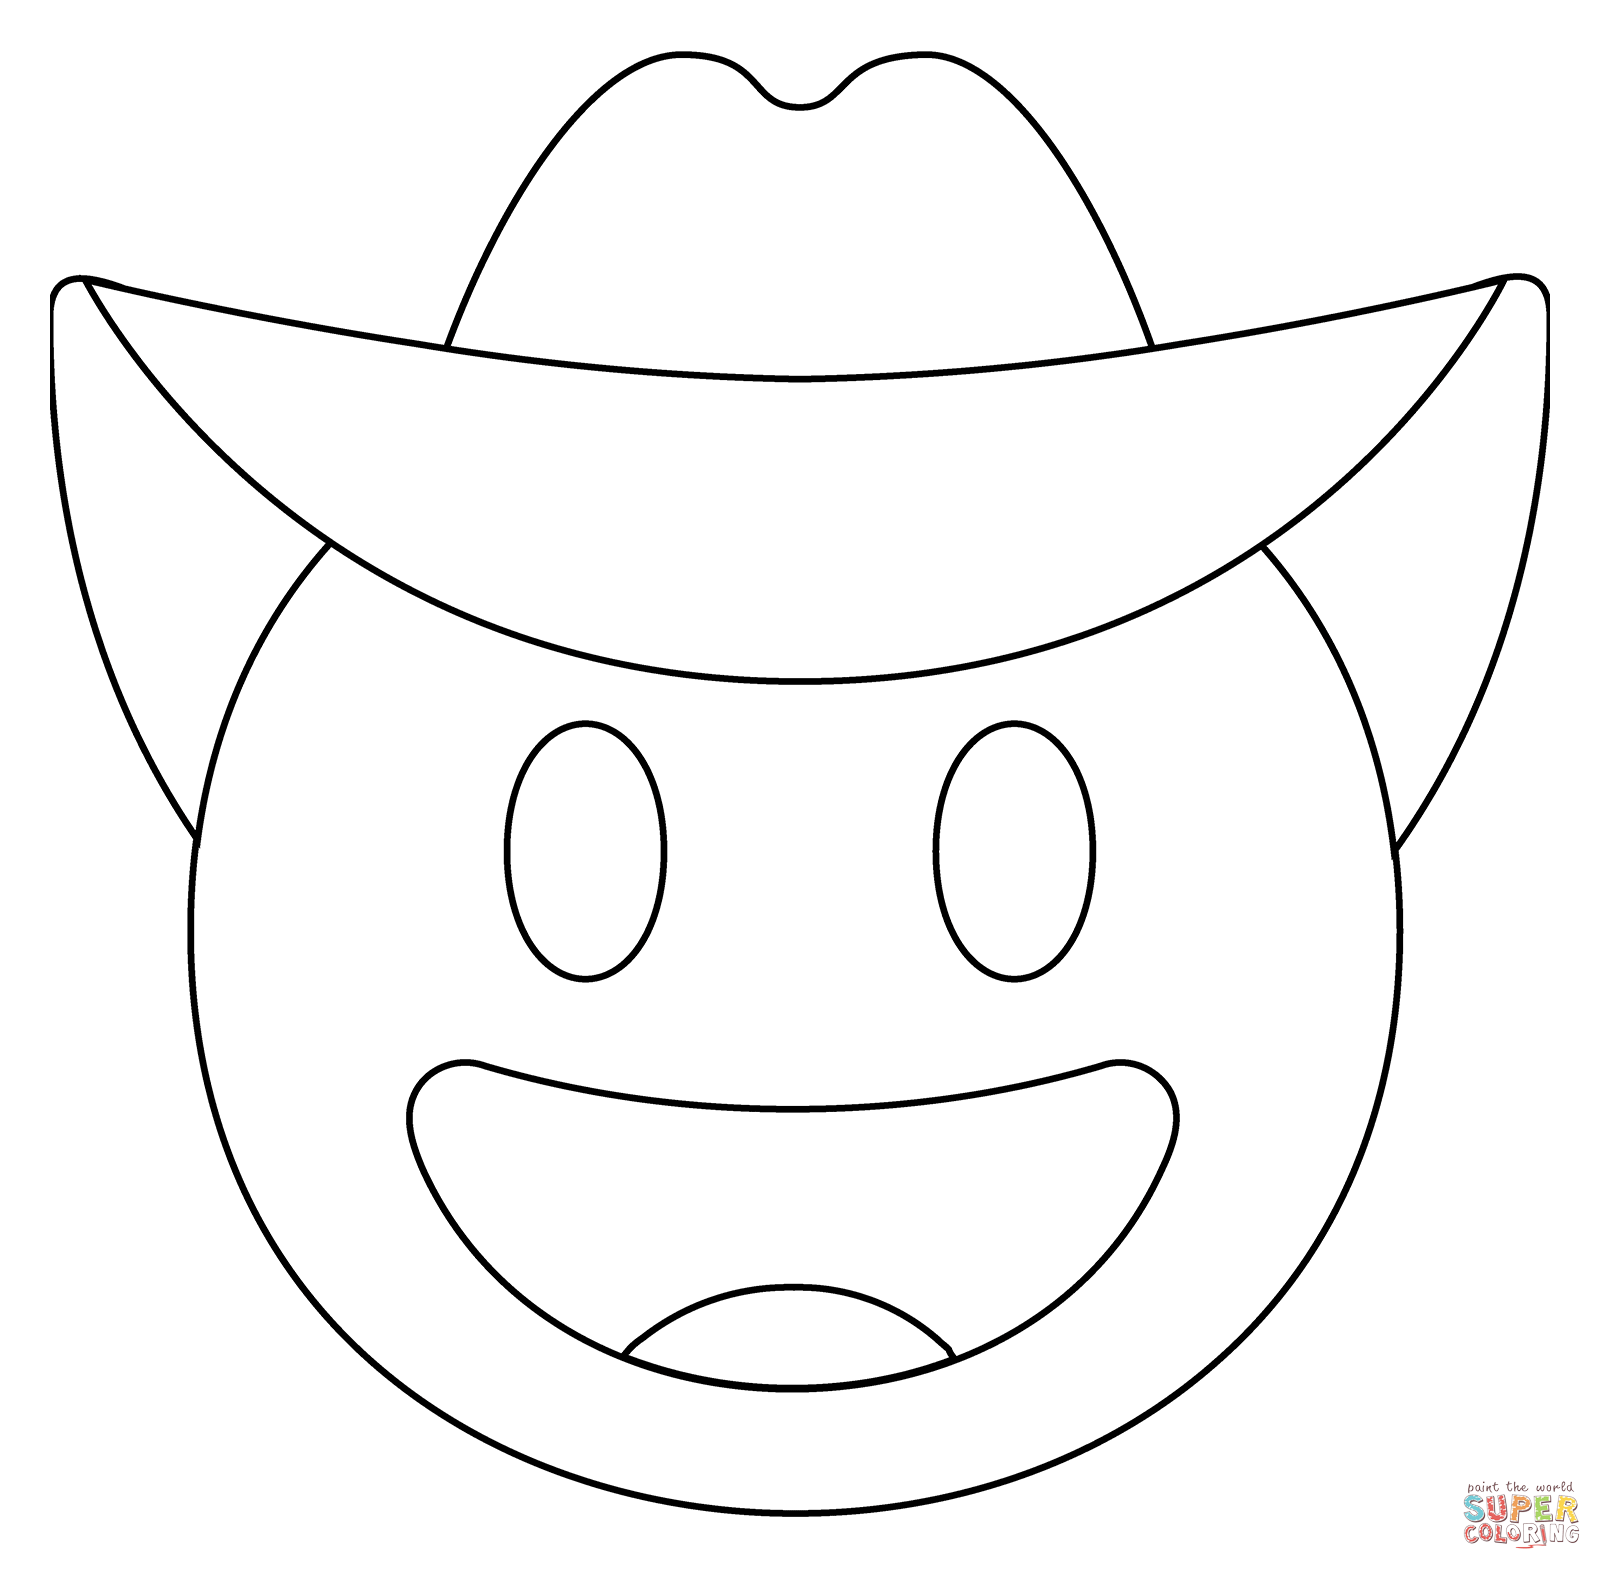 Cowboy hat face emoji coloring page free printable coloring pages